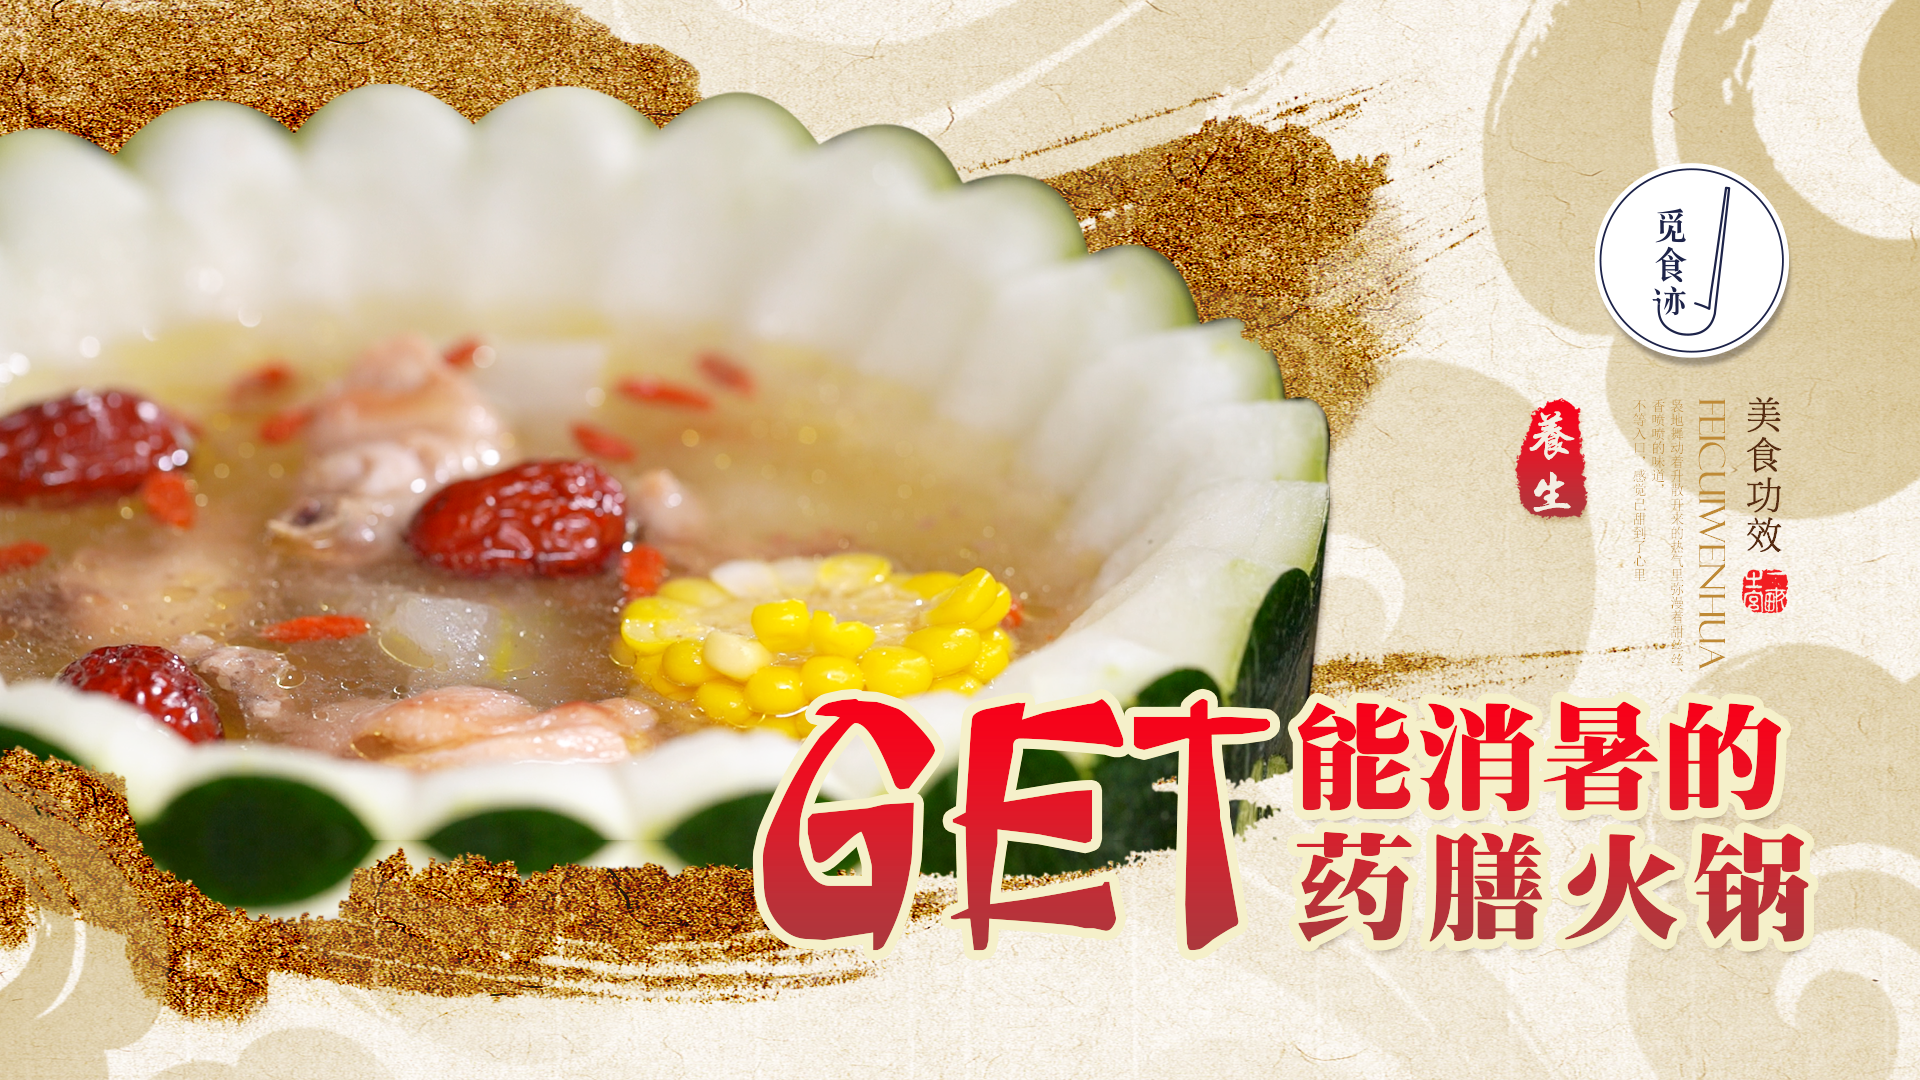 Cool down the hot pot! It won't catch fire in summer.